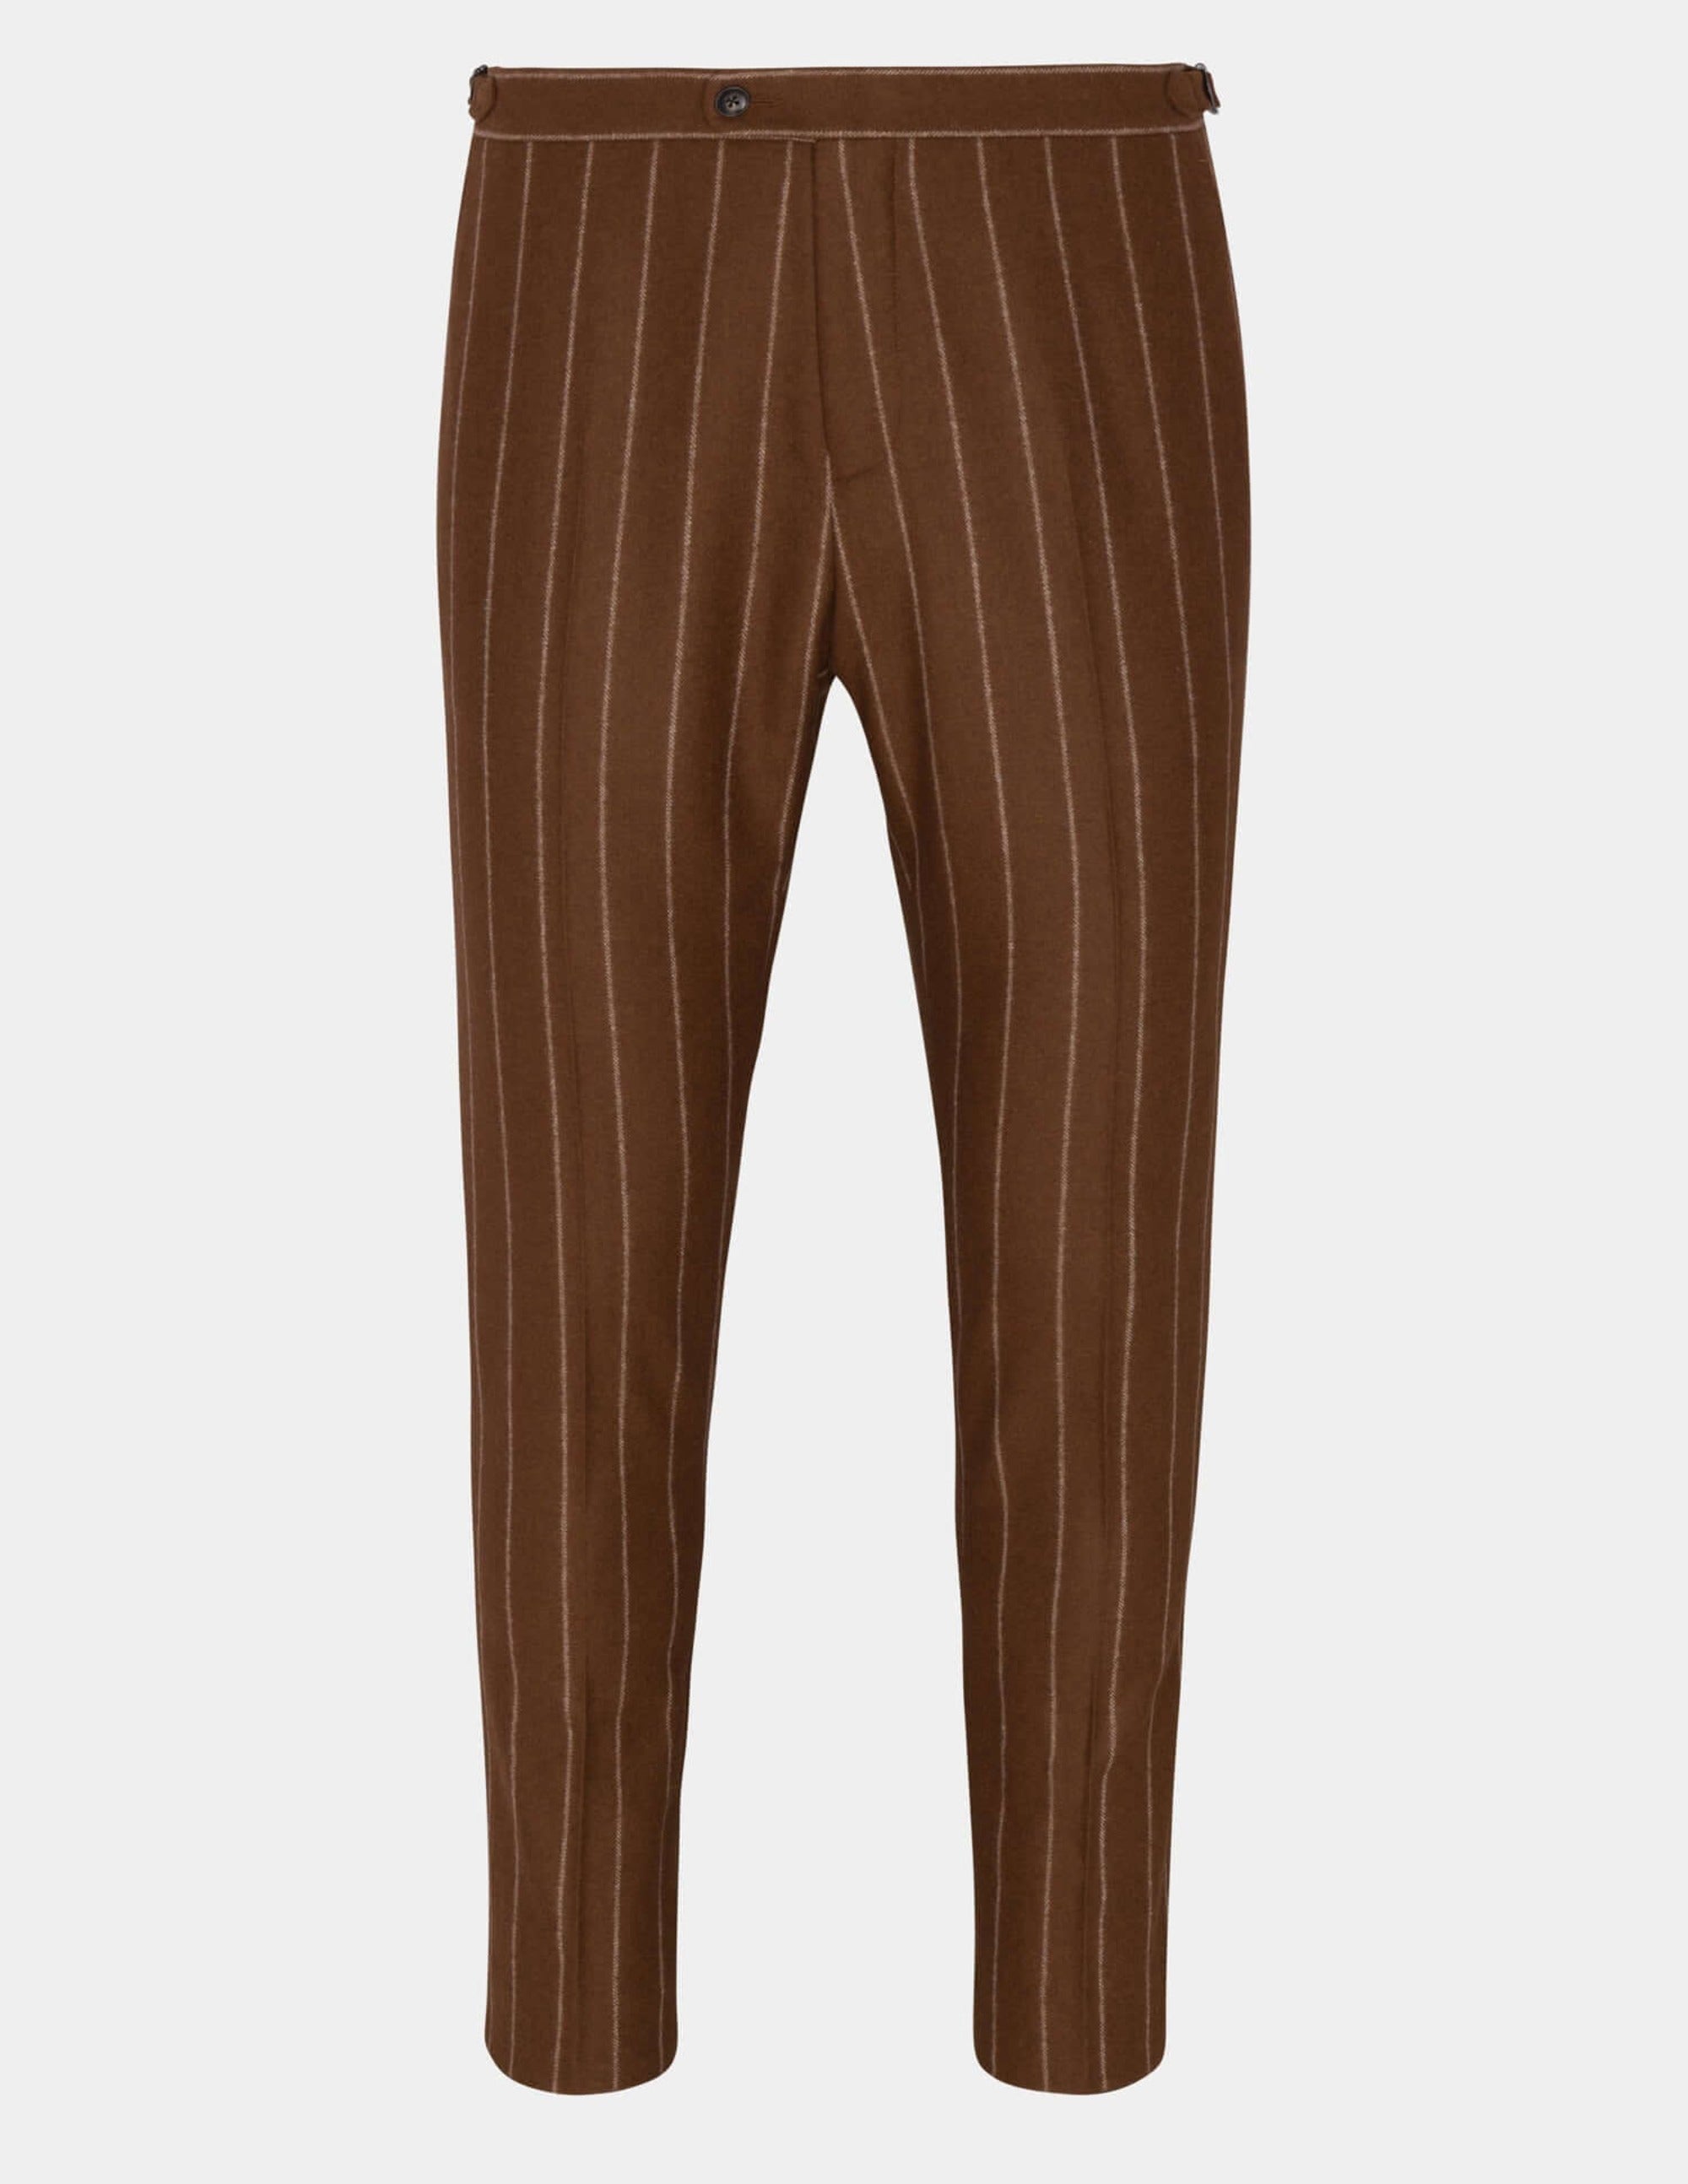 Bisonte Off-White Wool Cashmere Trousers - Samir Bachkami